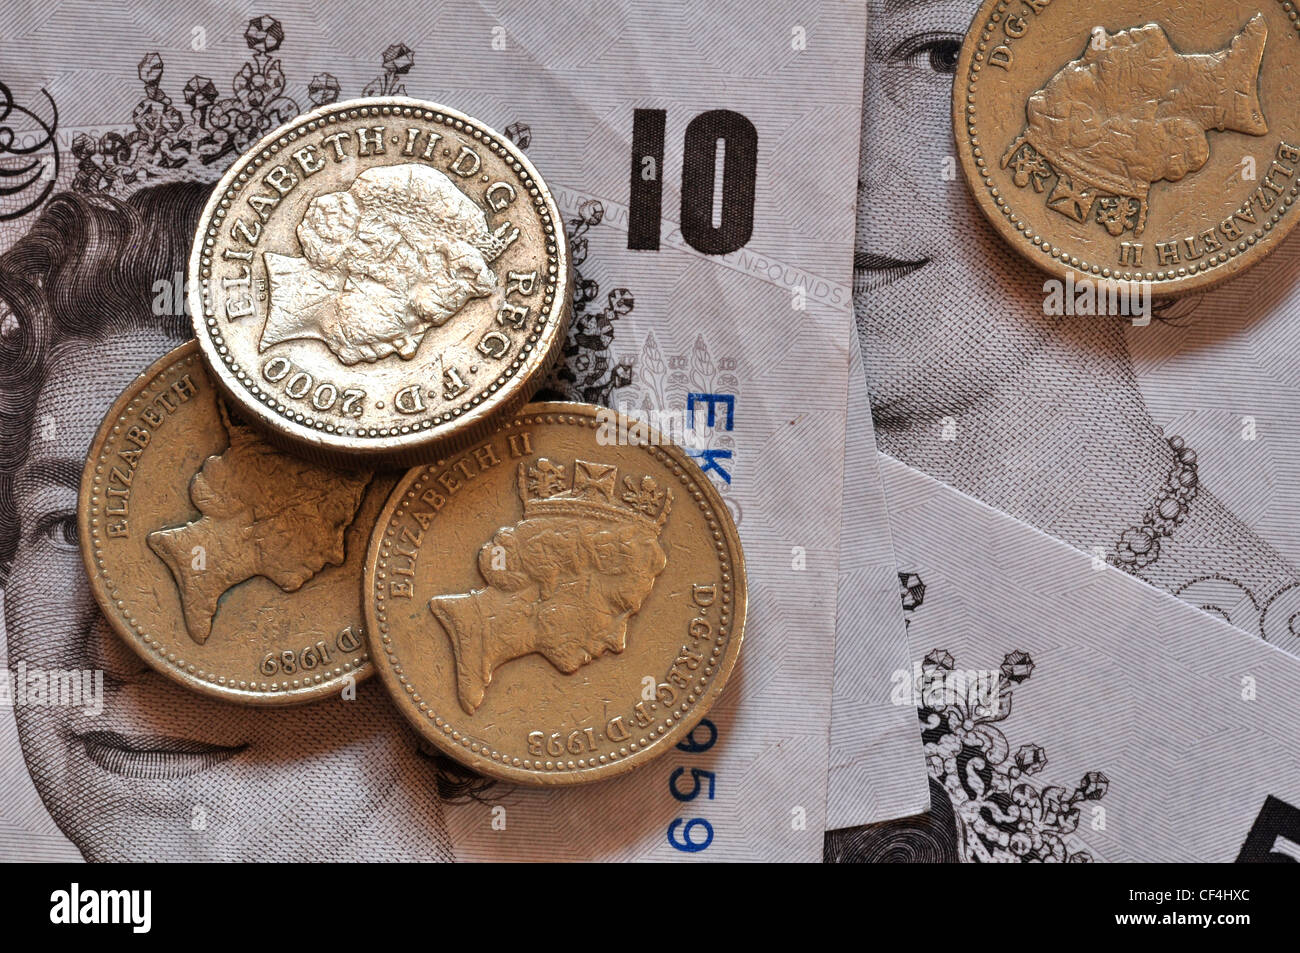 Pound coins and ten pound notes, Sterling currency UK Stock Photo